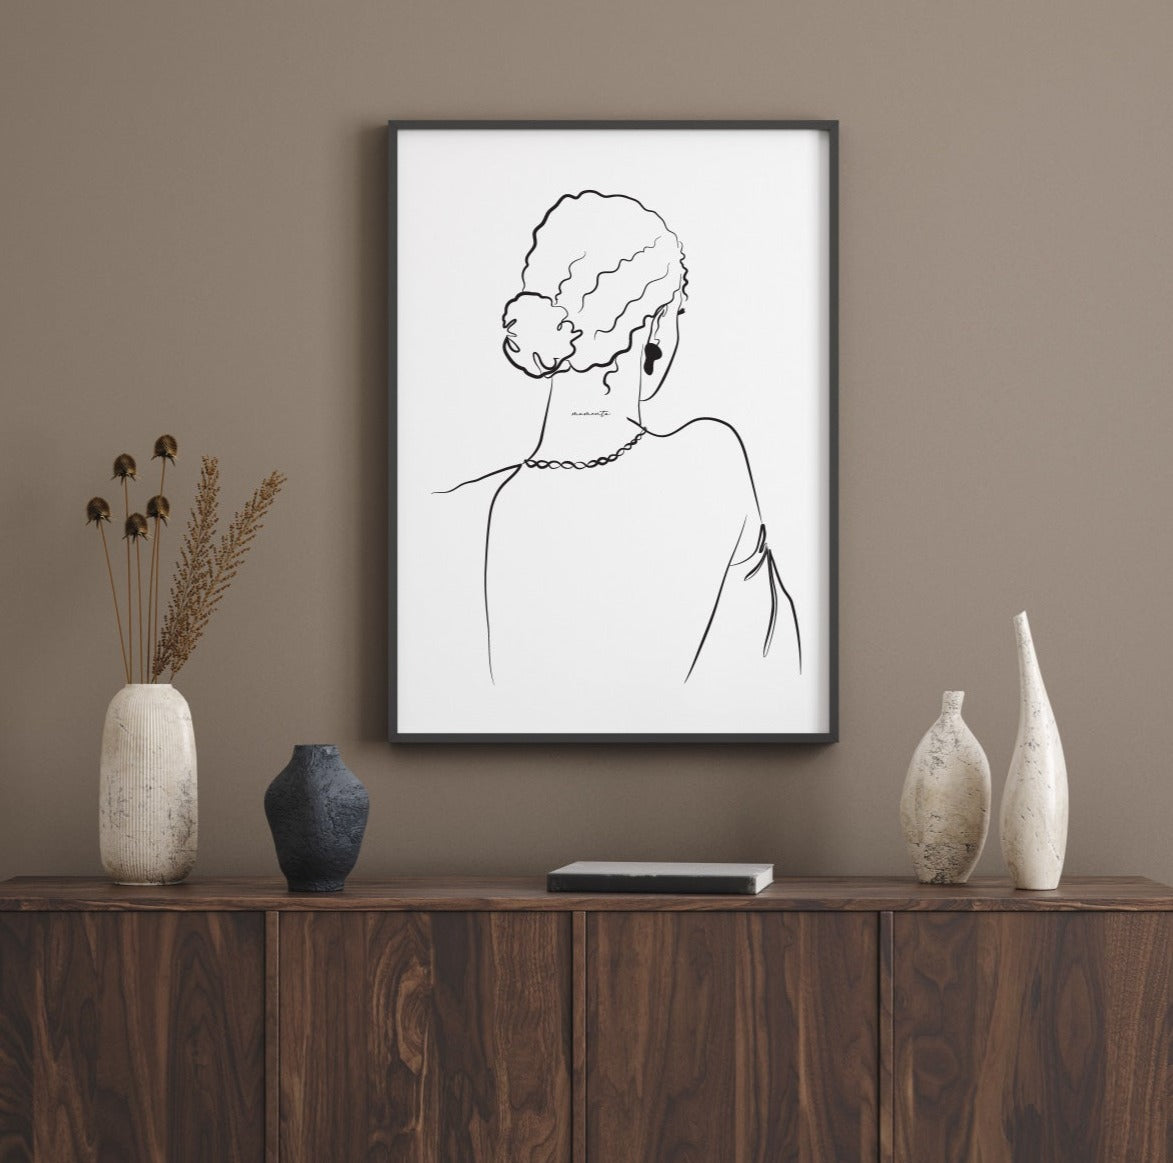 Pose for the camera, this abstract line art piece brings a sense of movement to any space. #artwork #digitalart #lineart #modernart #wallart